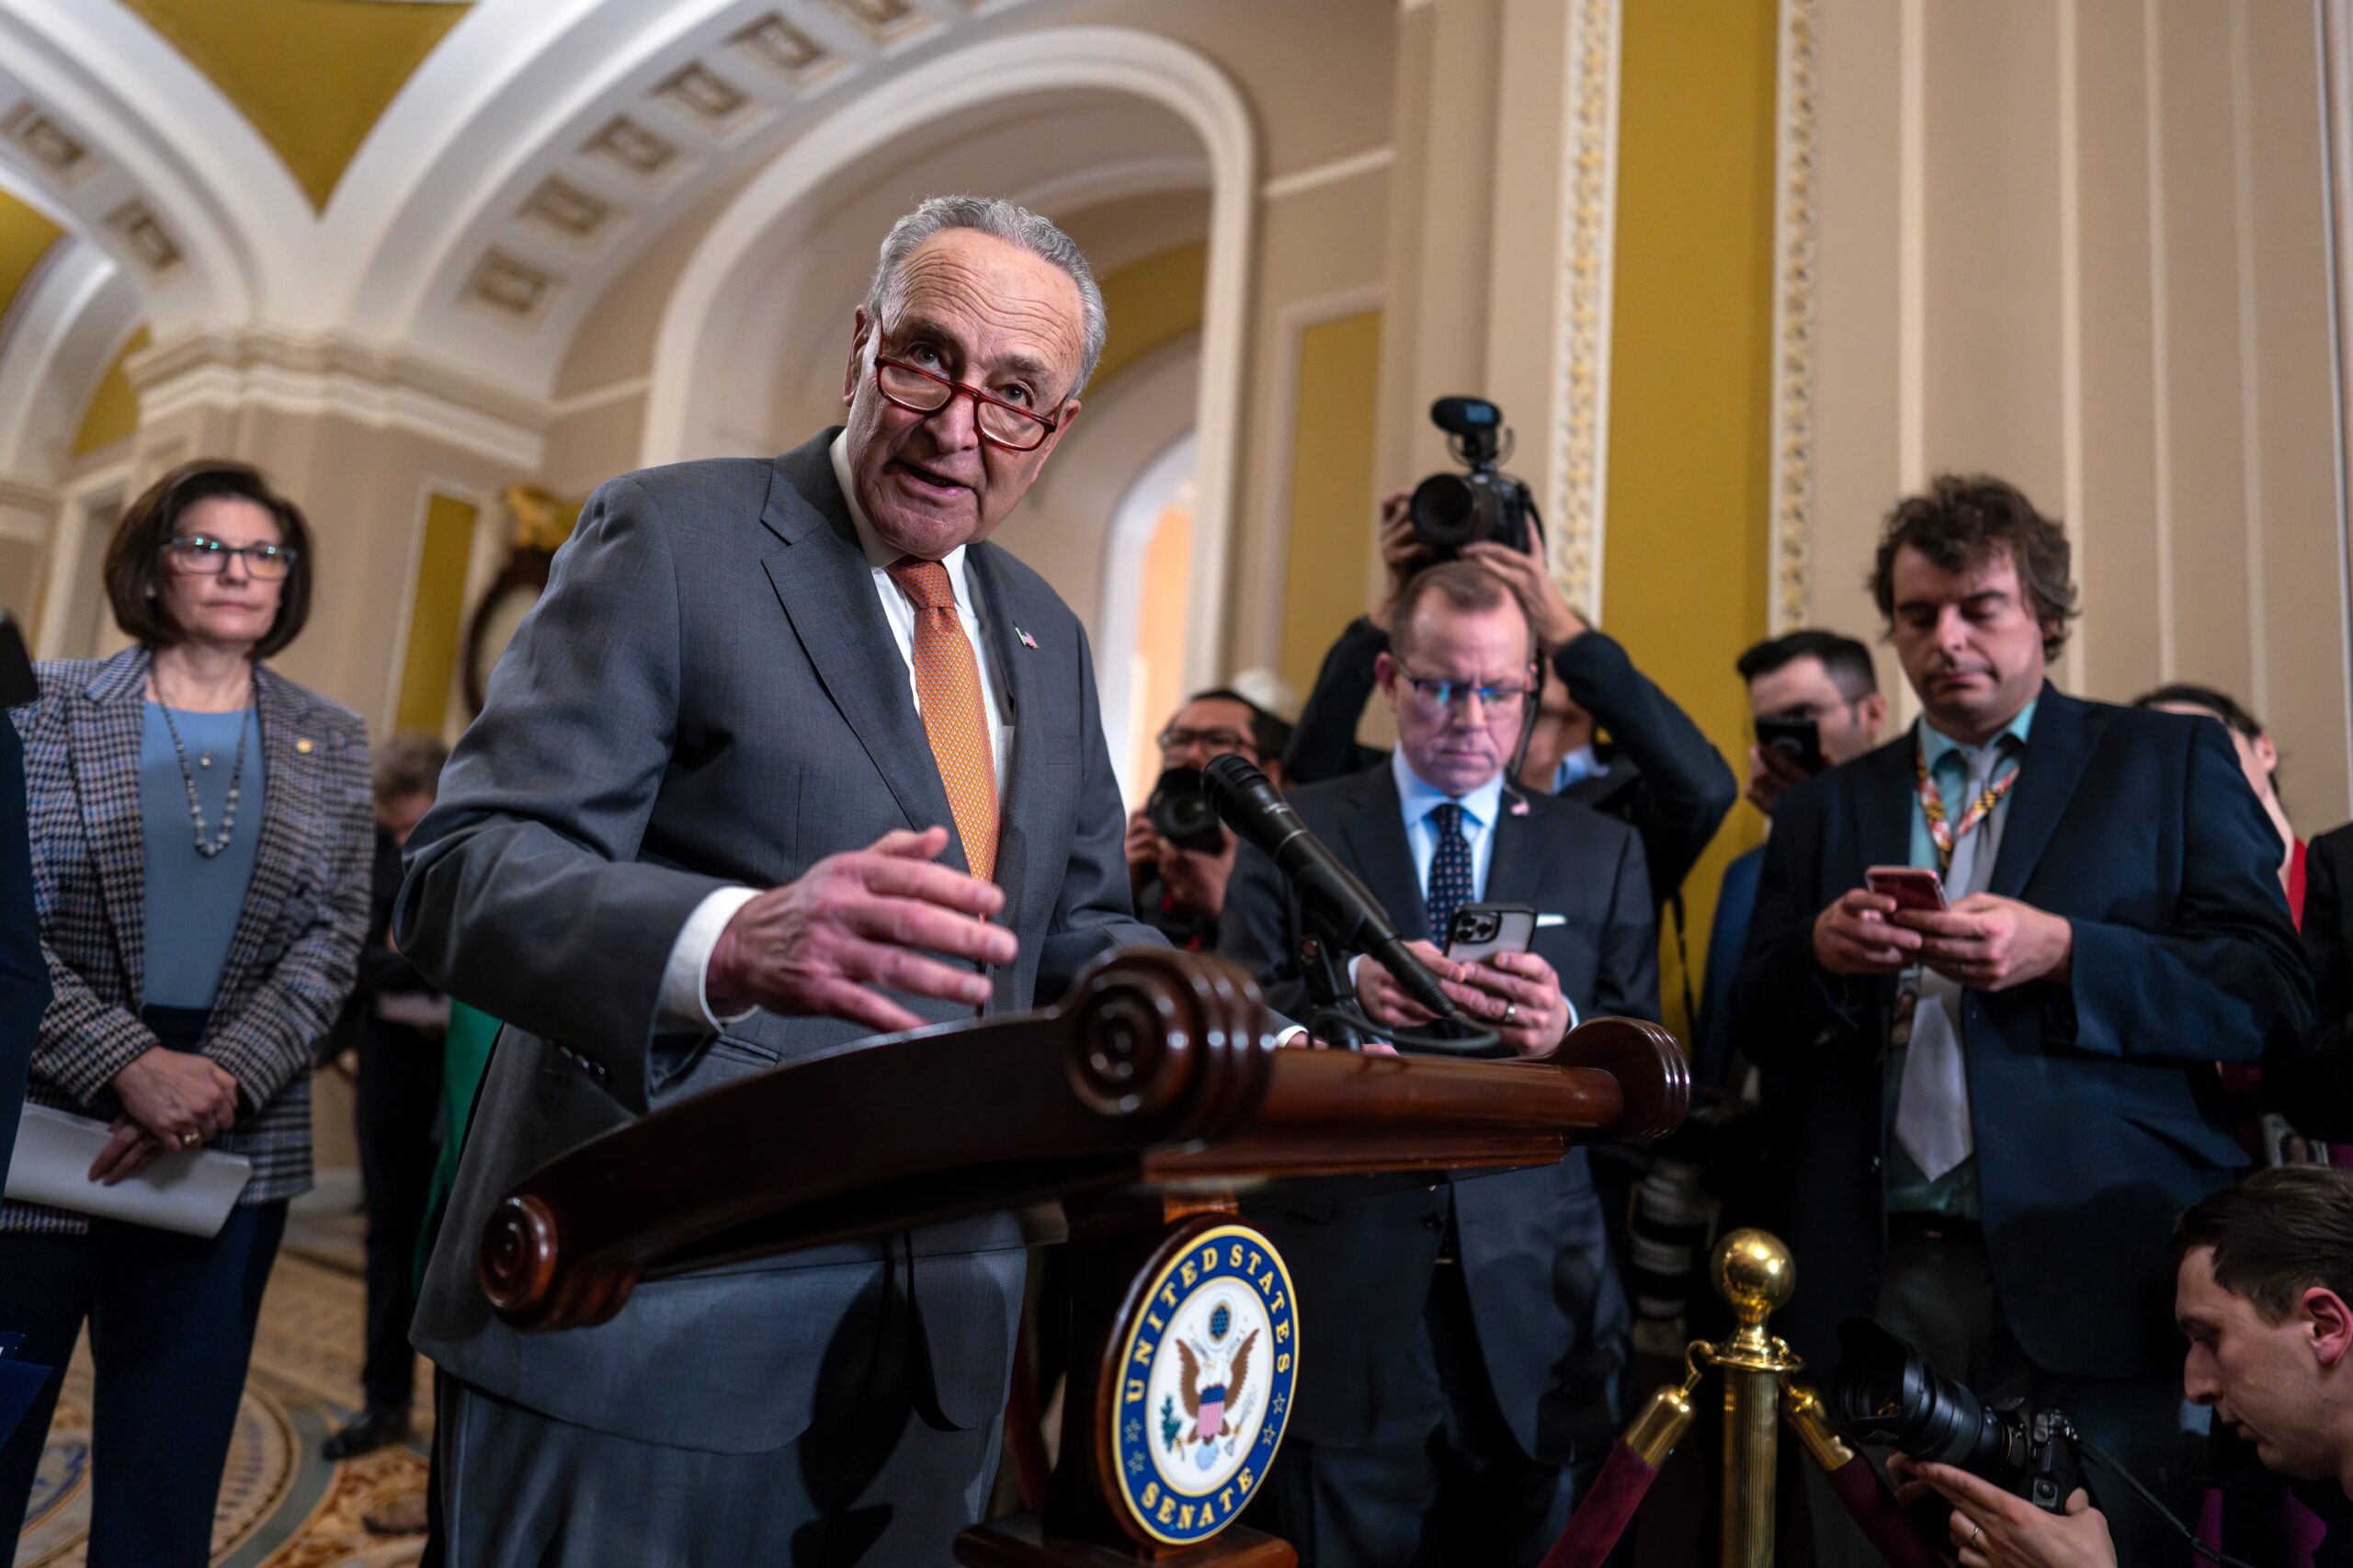 Schumer speech on Israel slammed by Republicans, experts as ‘unprecedented’ and ‘ridiculous’